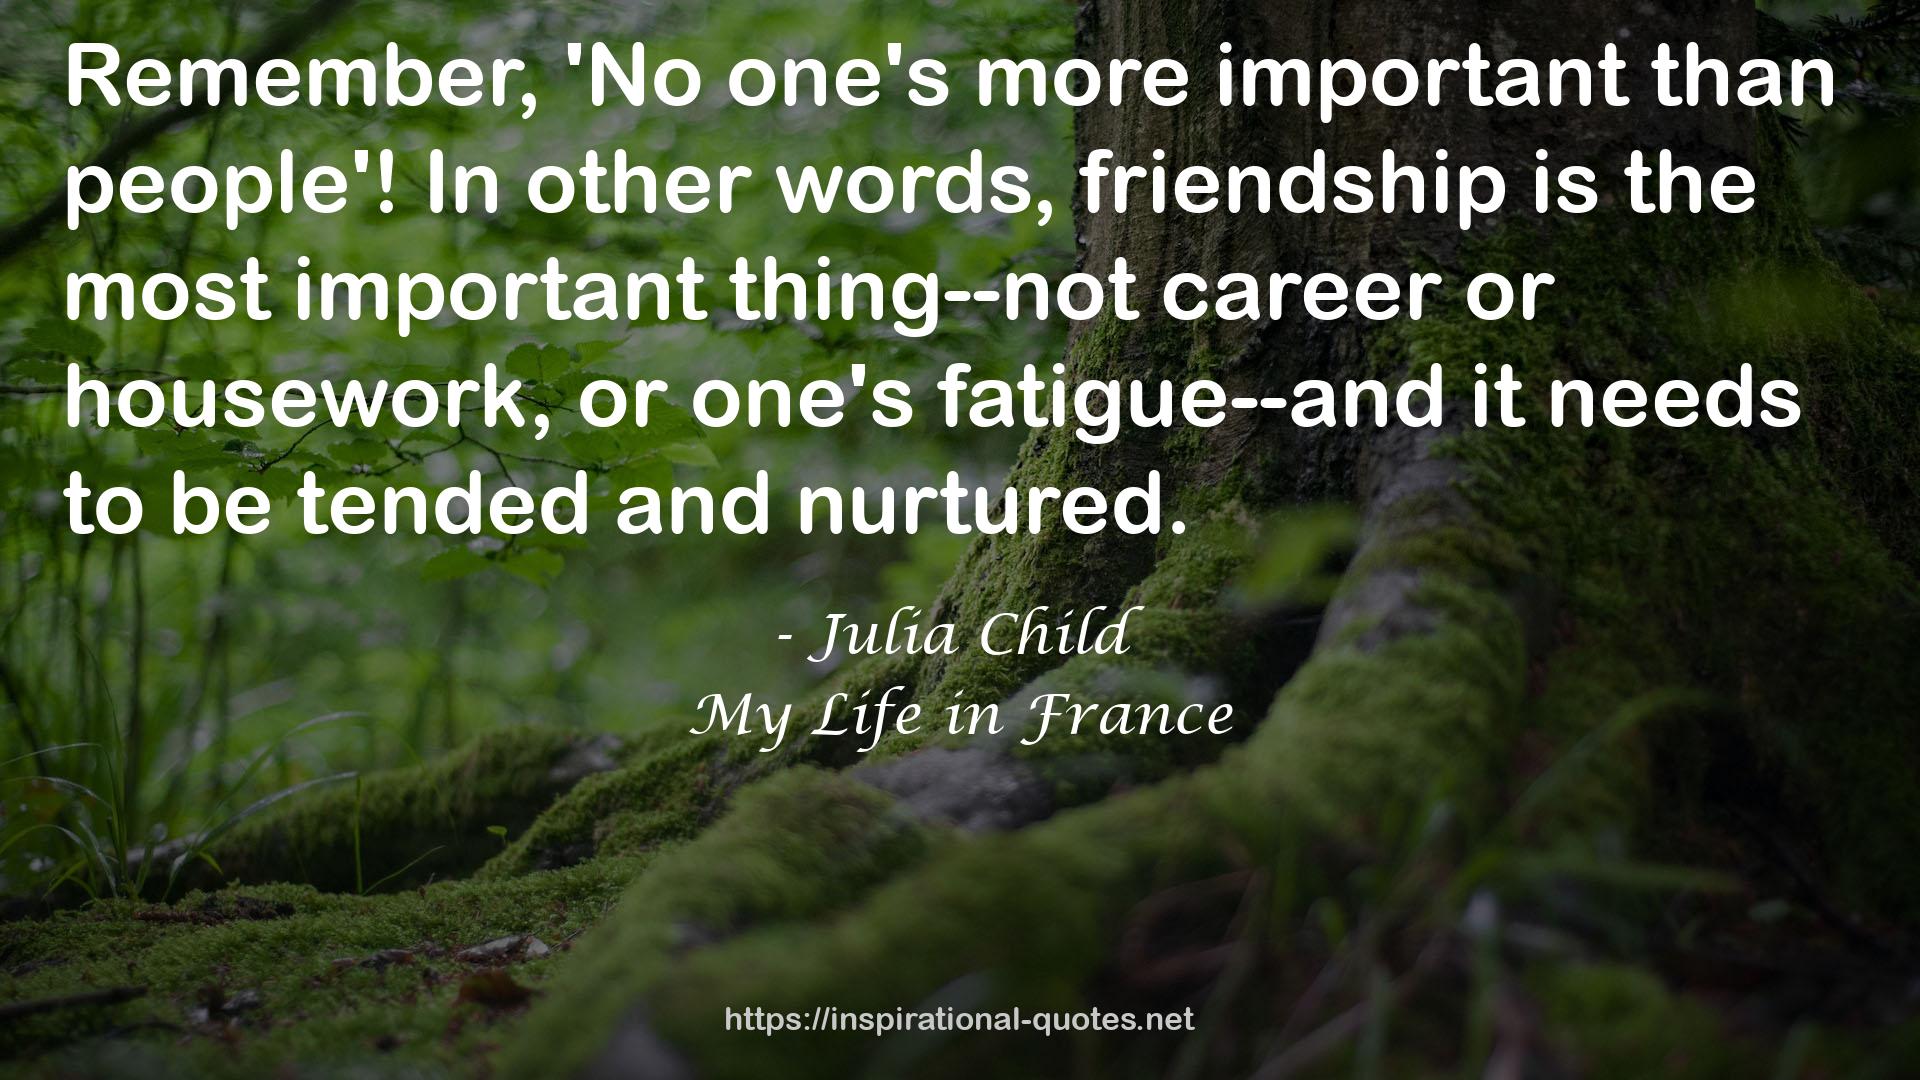 My Life in France QUOTES